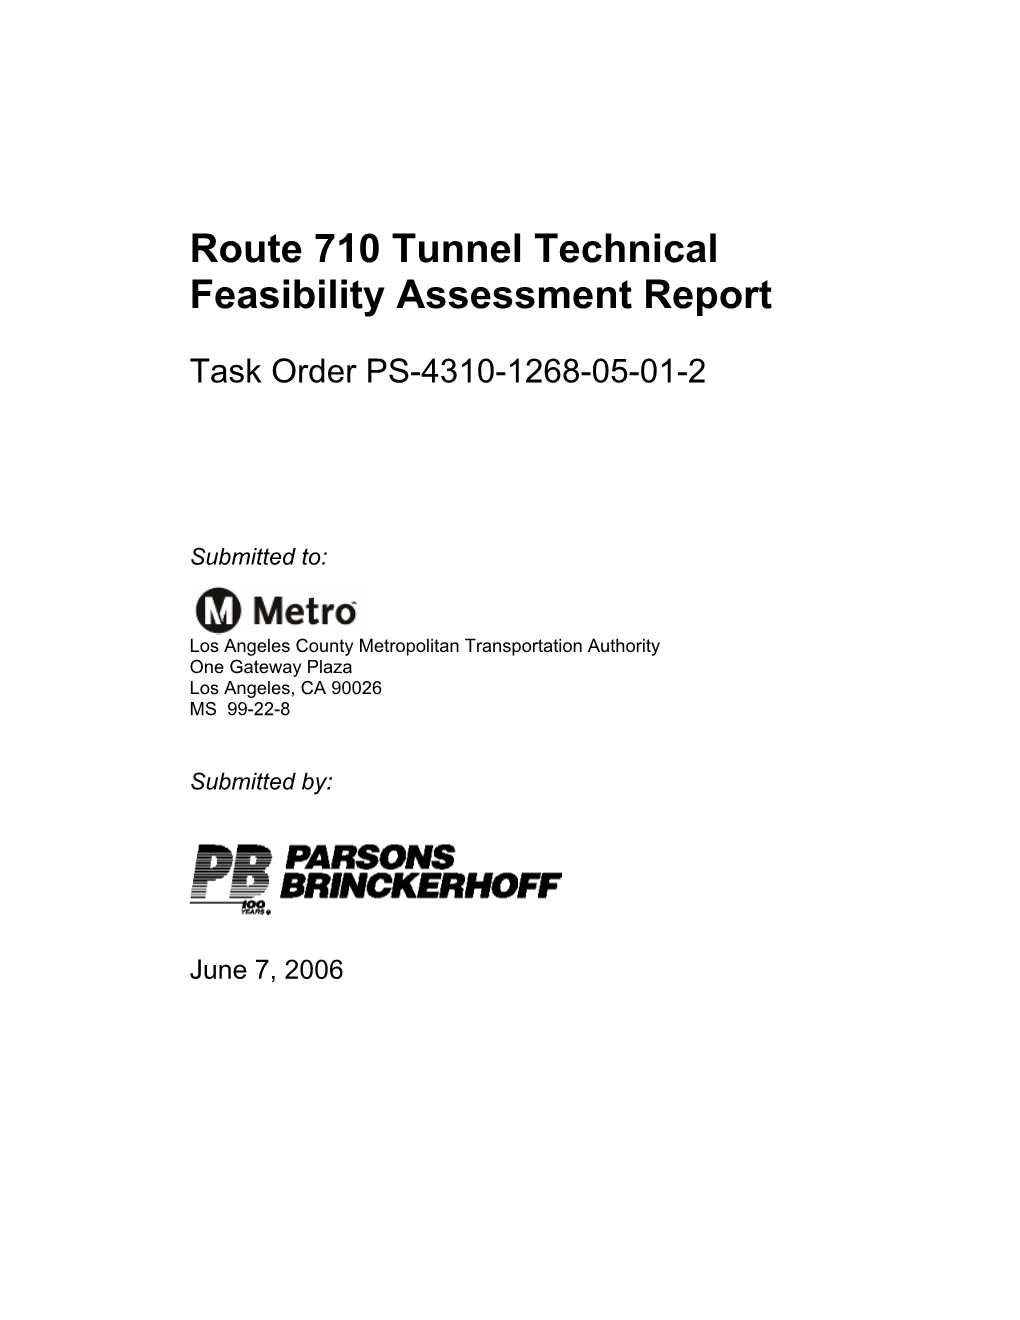 Route 710 Tunnel Technical Feasibility Assessment Report